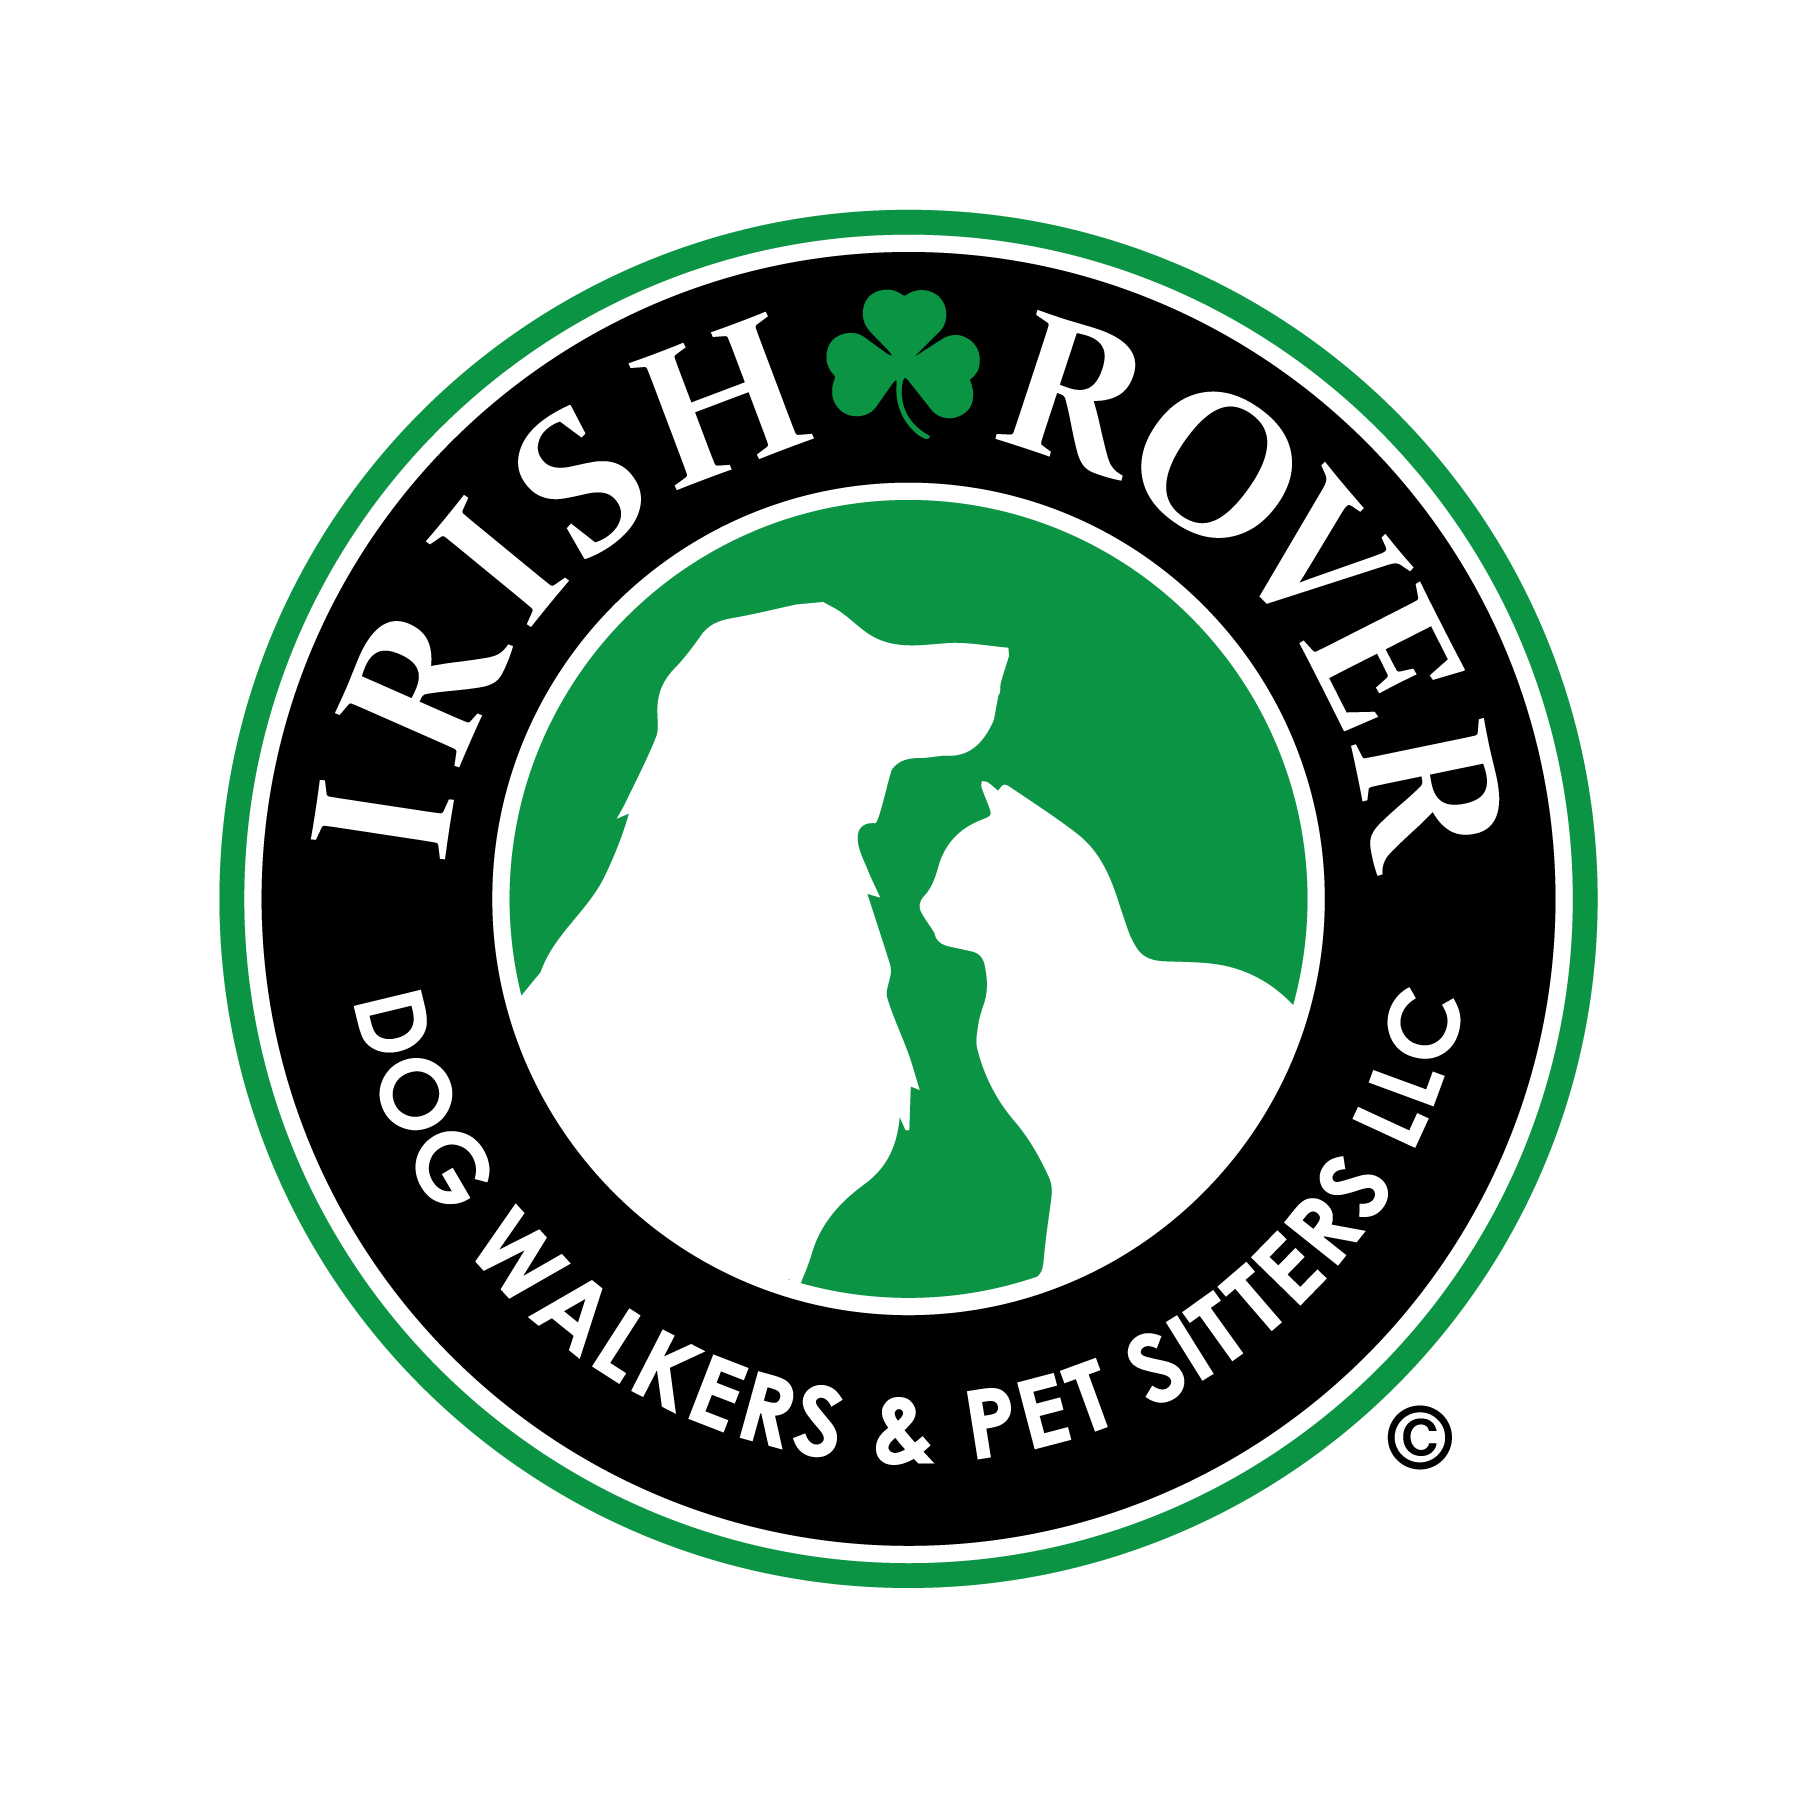 Dog Wlking Rover Logo - Irish Rover Dog Walkers and Pet Sitters, LLC